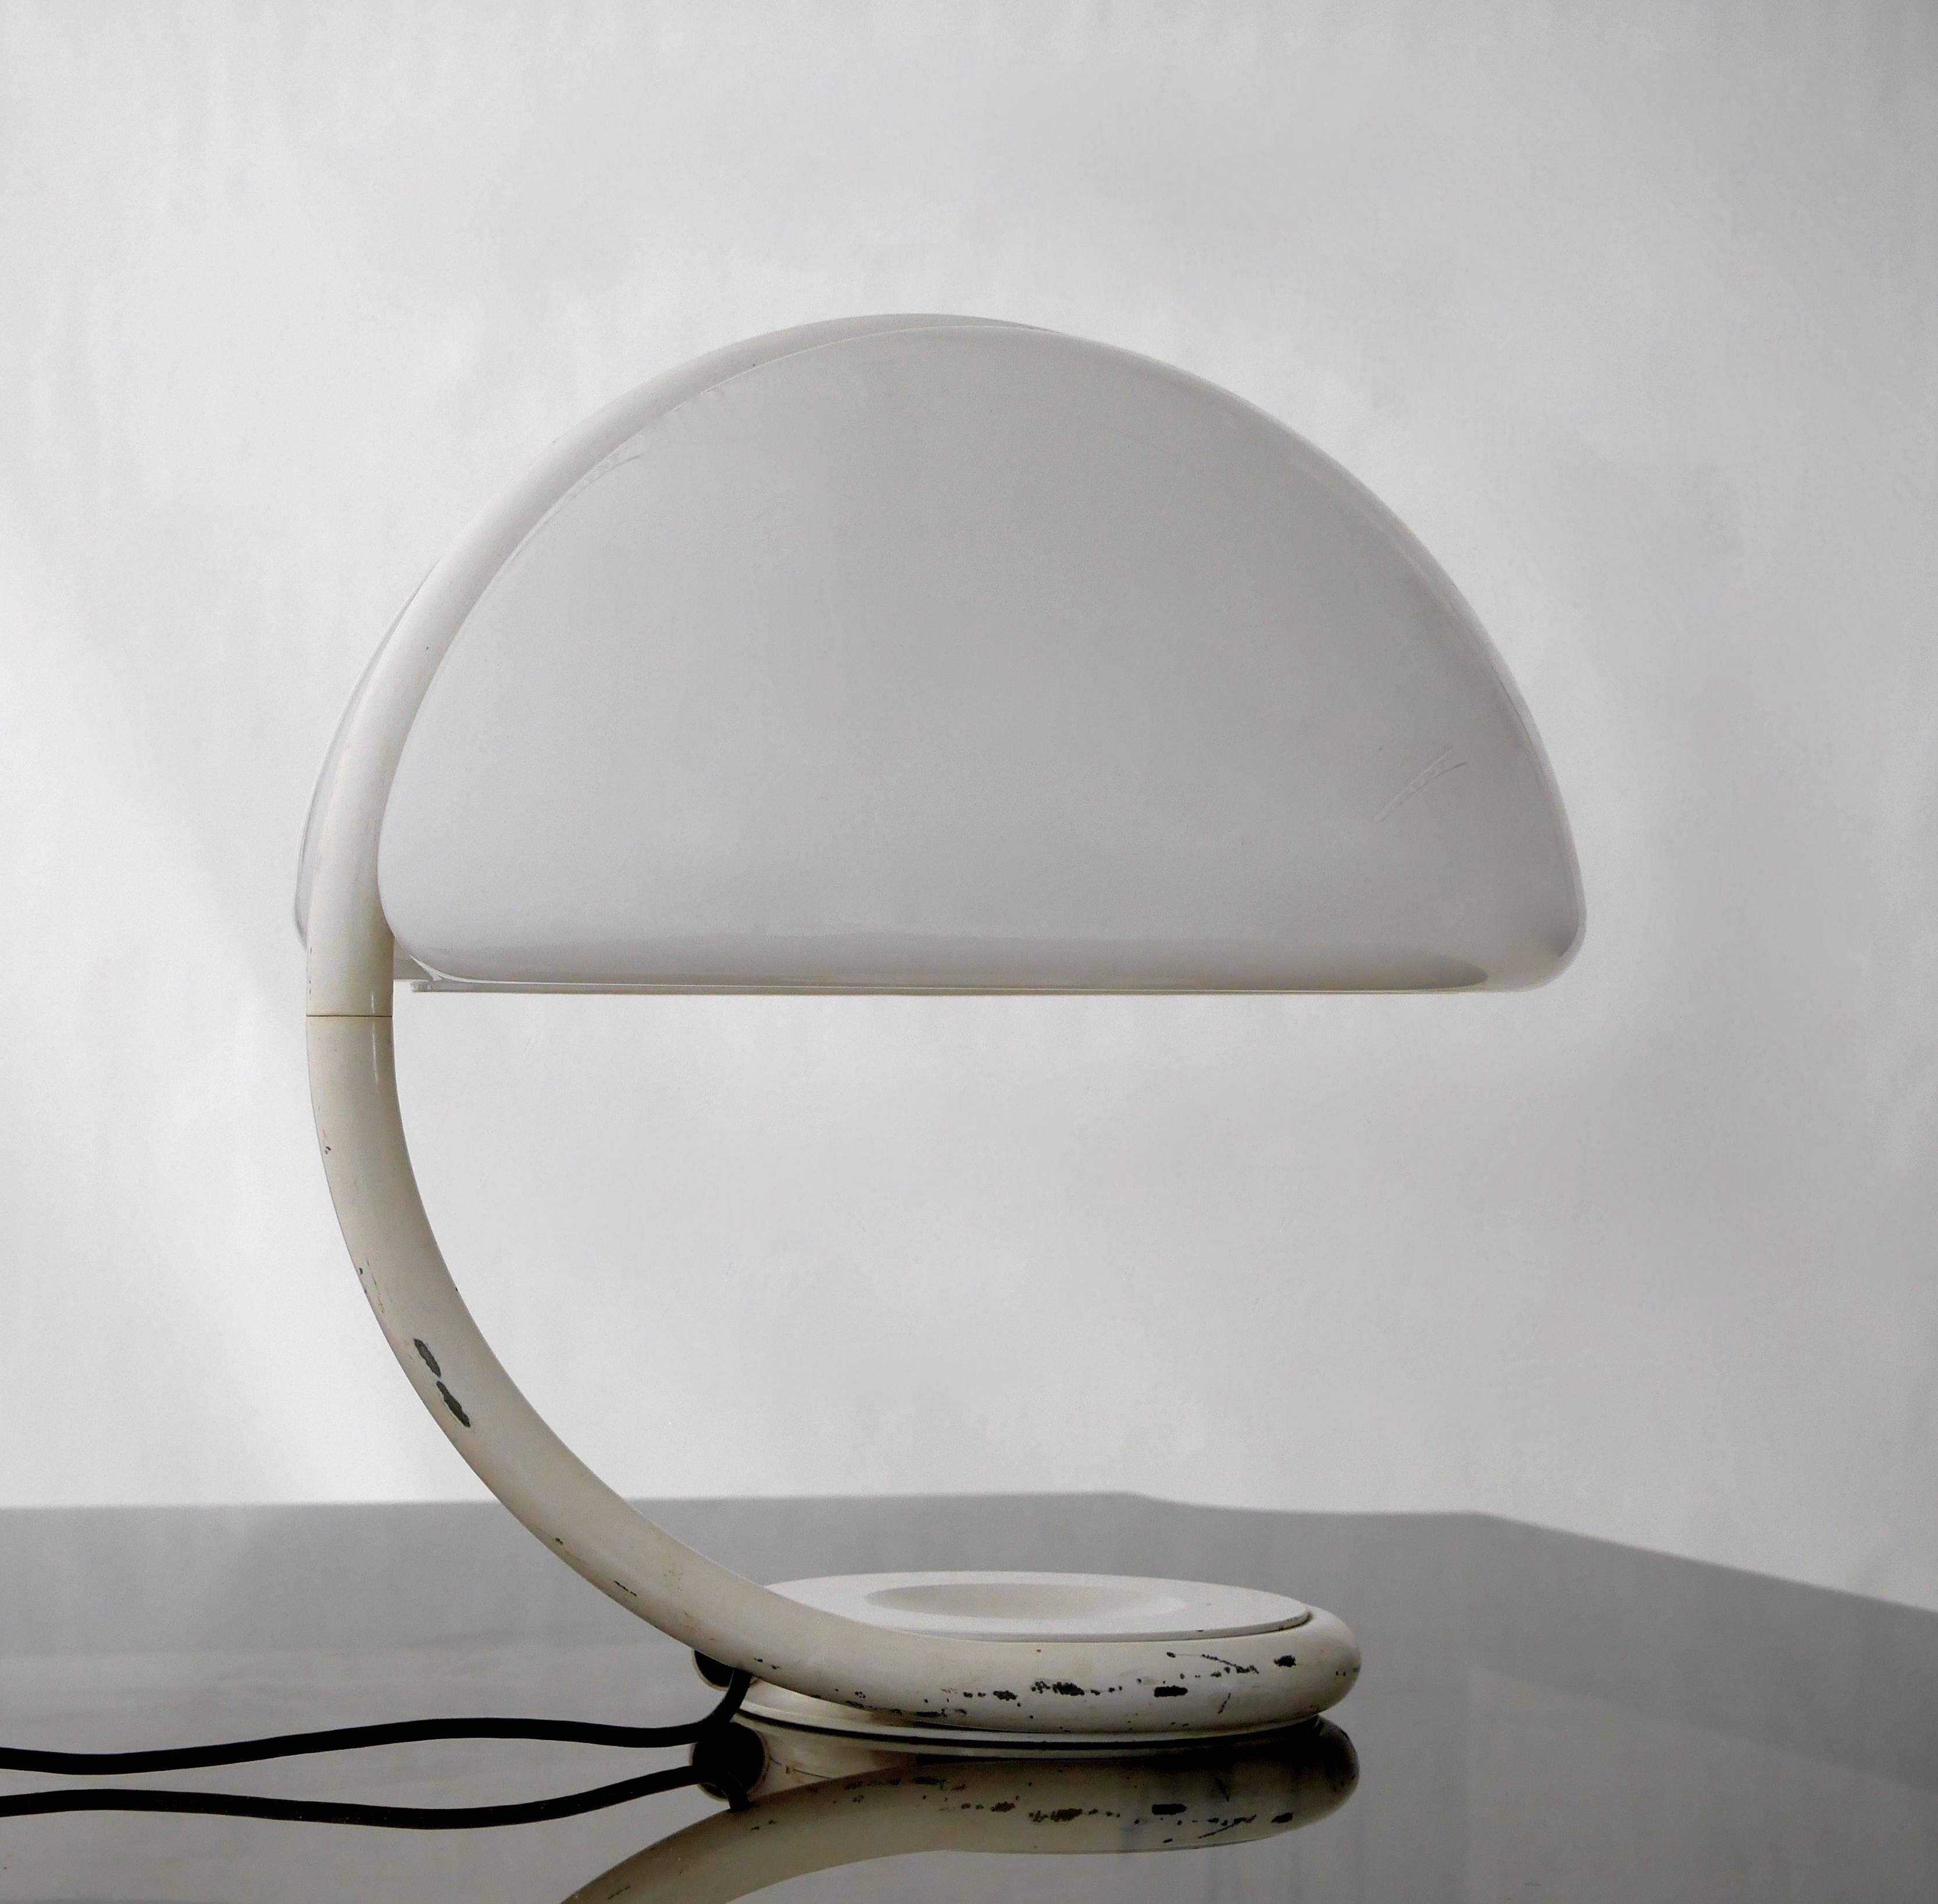 Elio Martnelli designed the serpente table lamp in 1965 for Martinelli Luce.
Some paint loss to base as pictured.